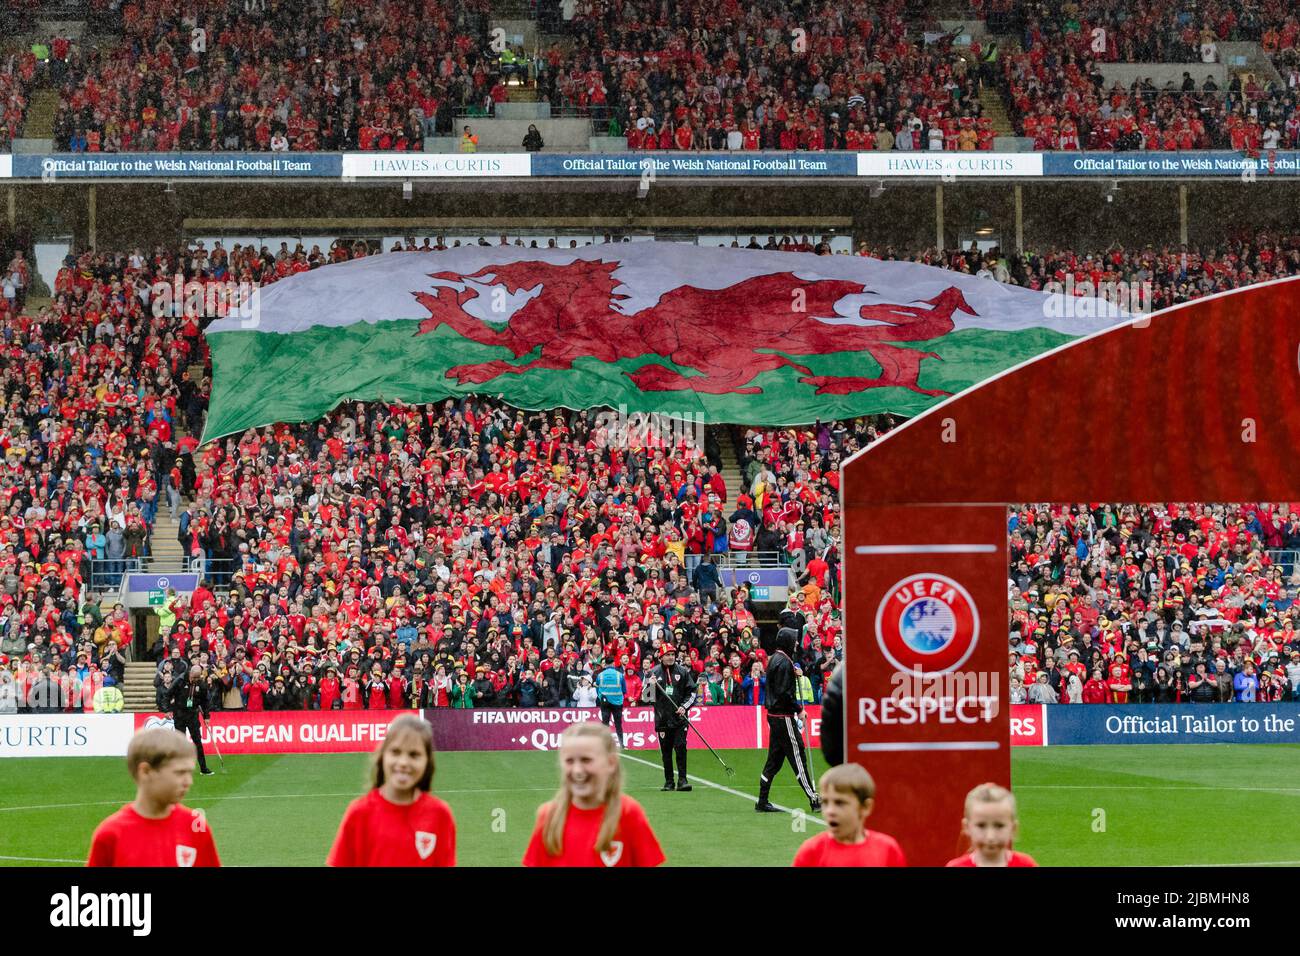 Cardiff City Stadium to host home Nations League opener - FAW